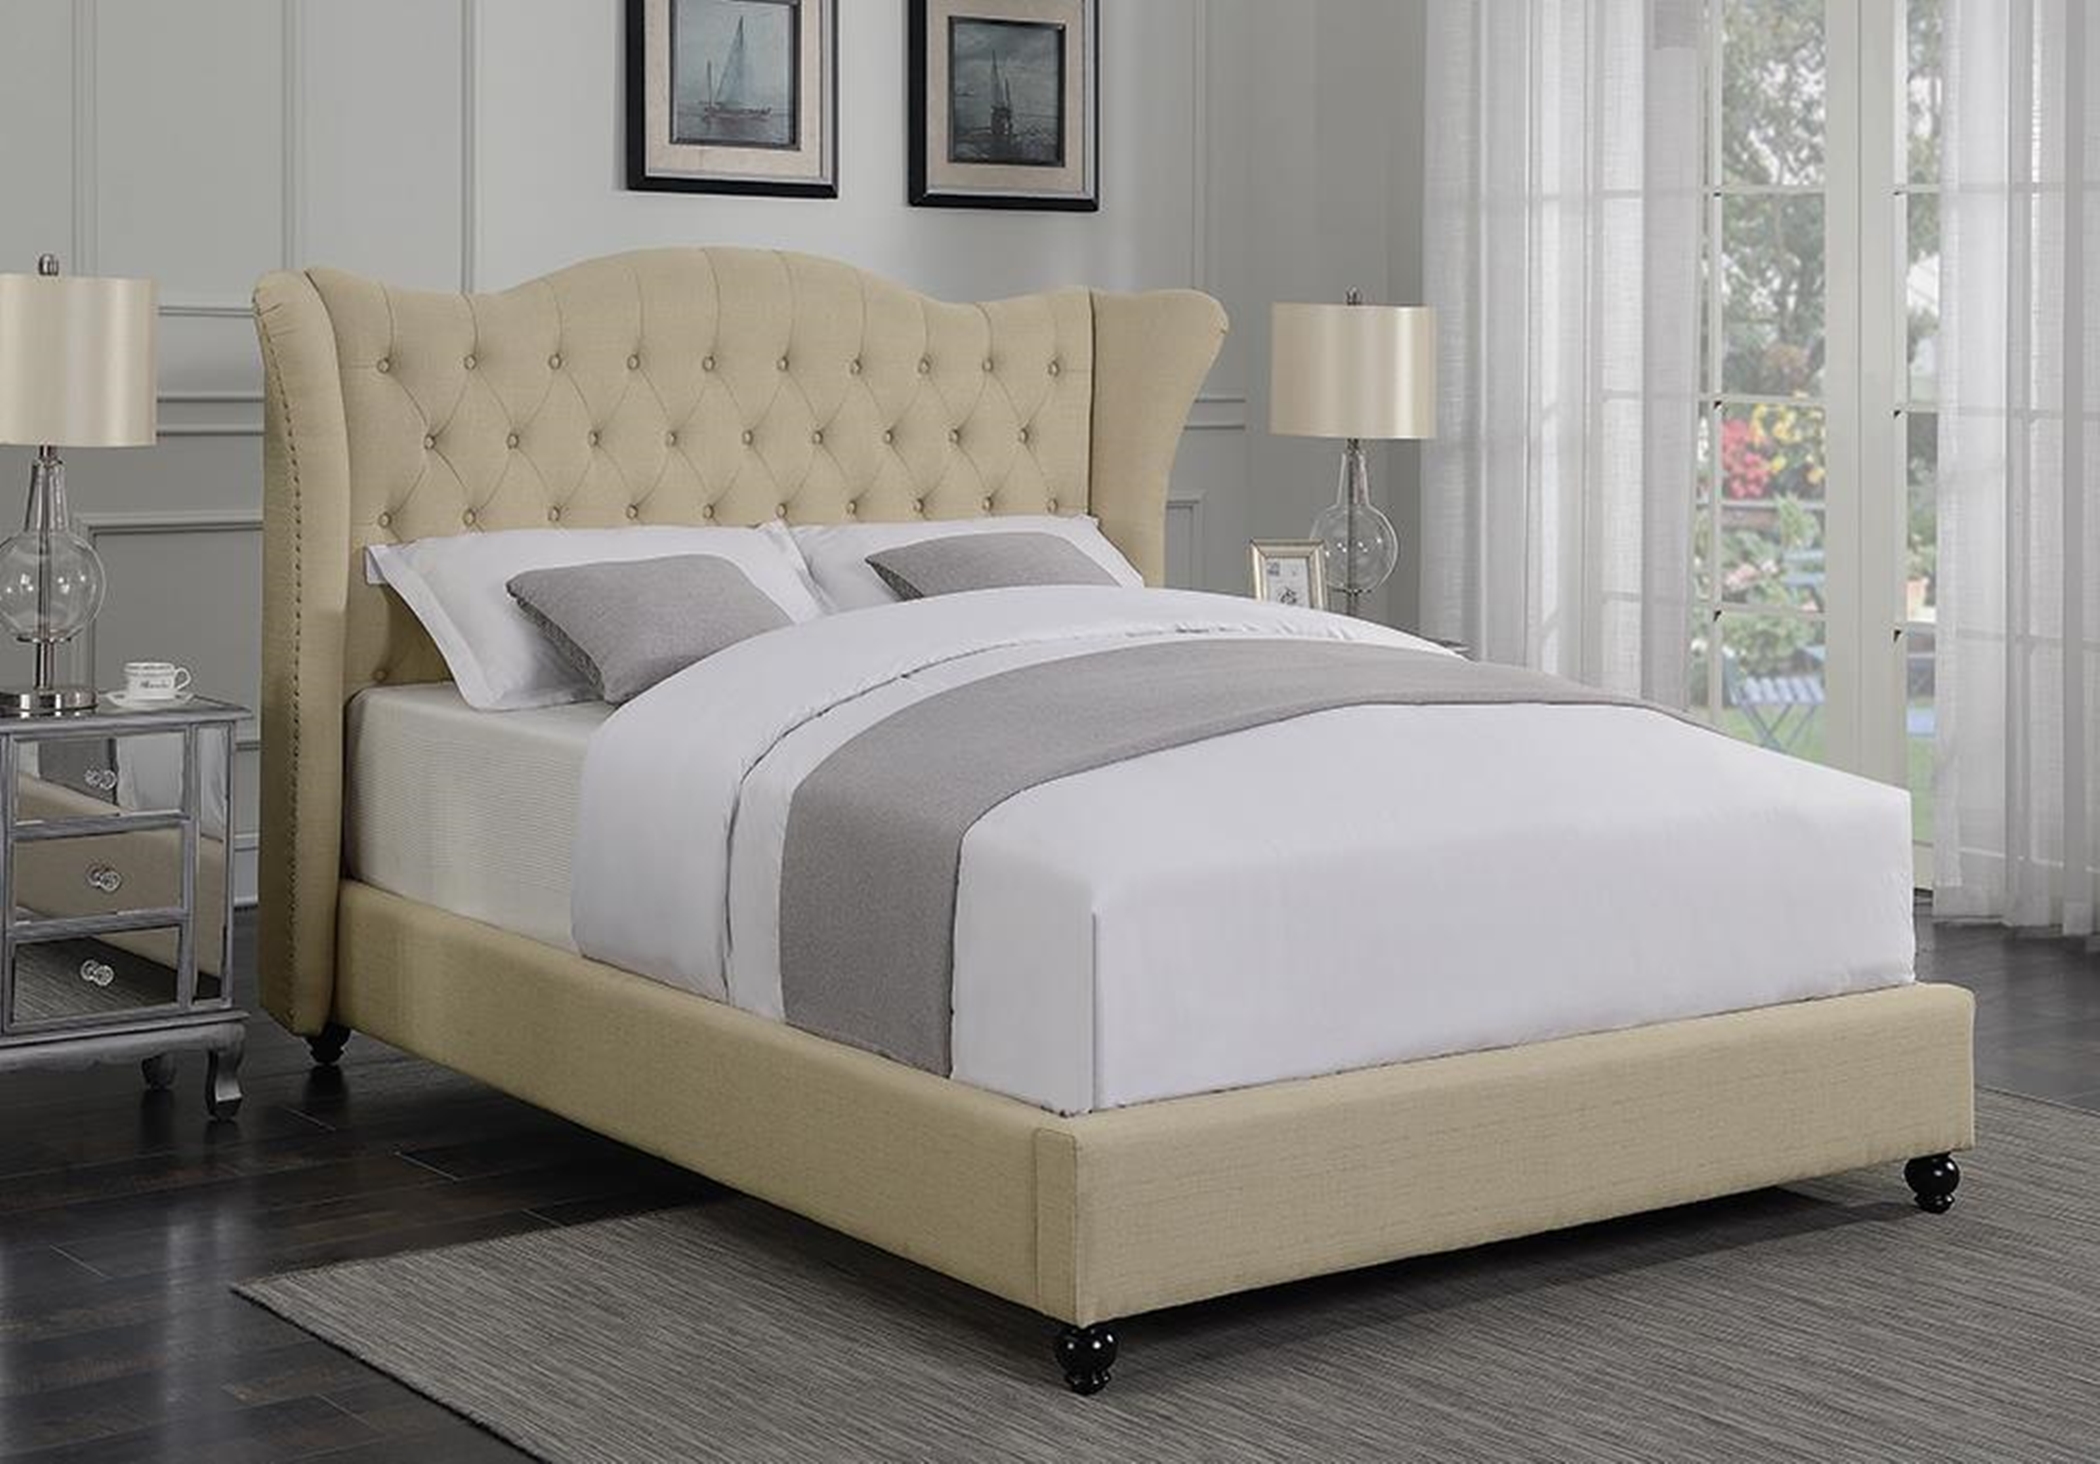 Coronado Beige Upholstered Full Bed - Click Image to Close